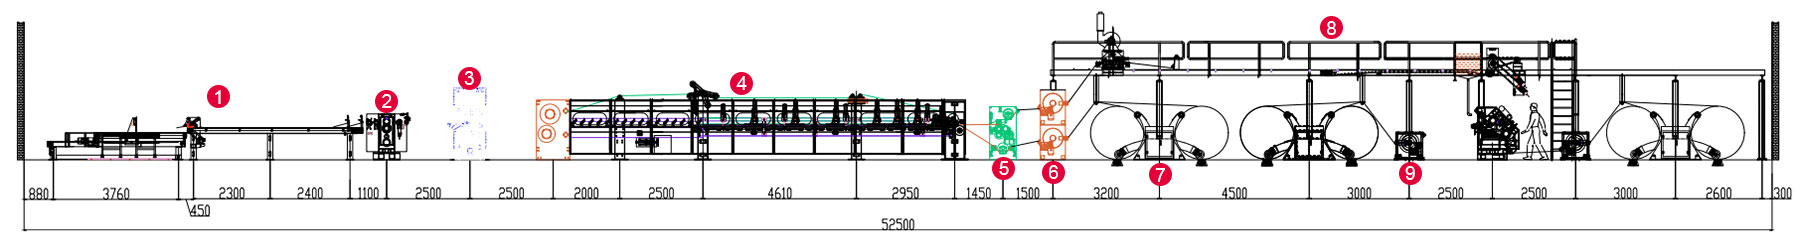 Layout of 3-ply Corrugated Cardboard Production Line